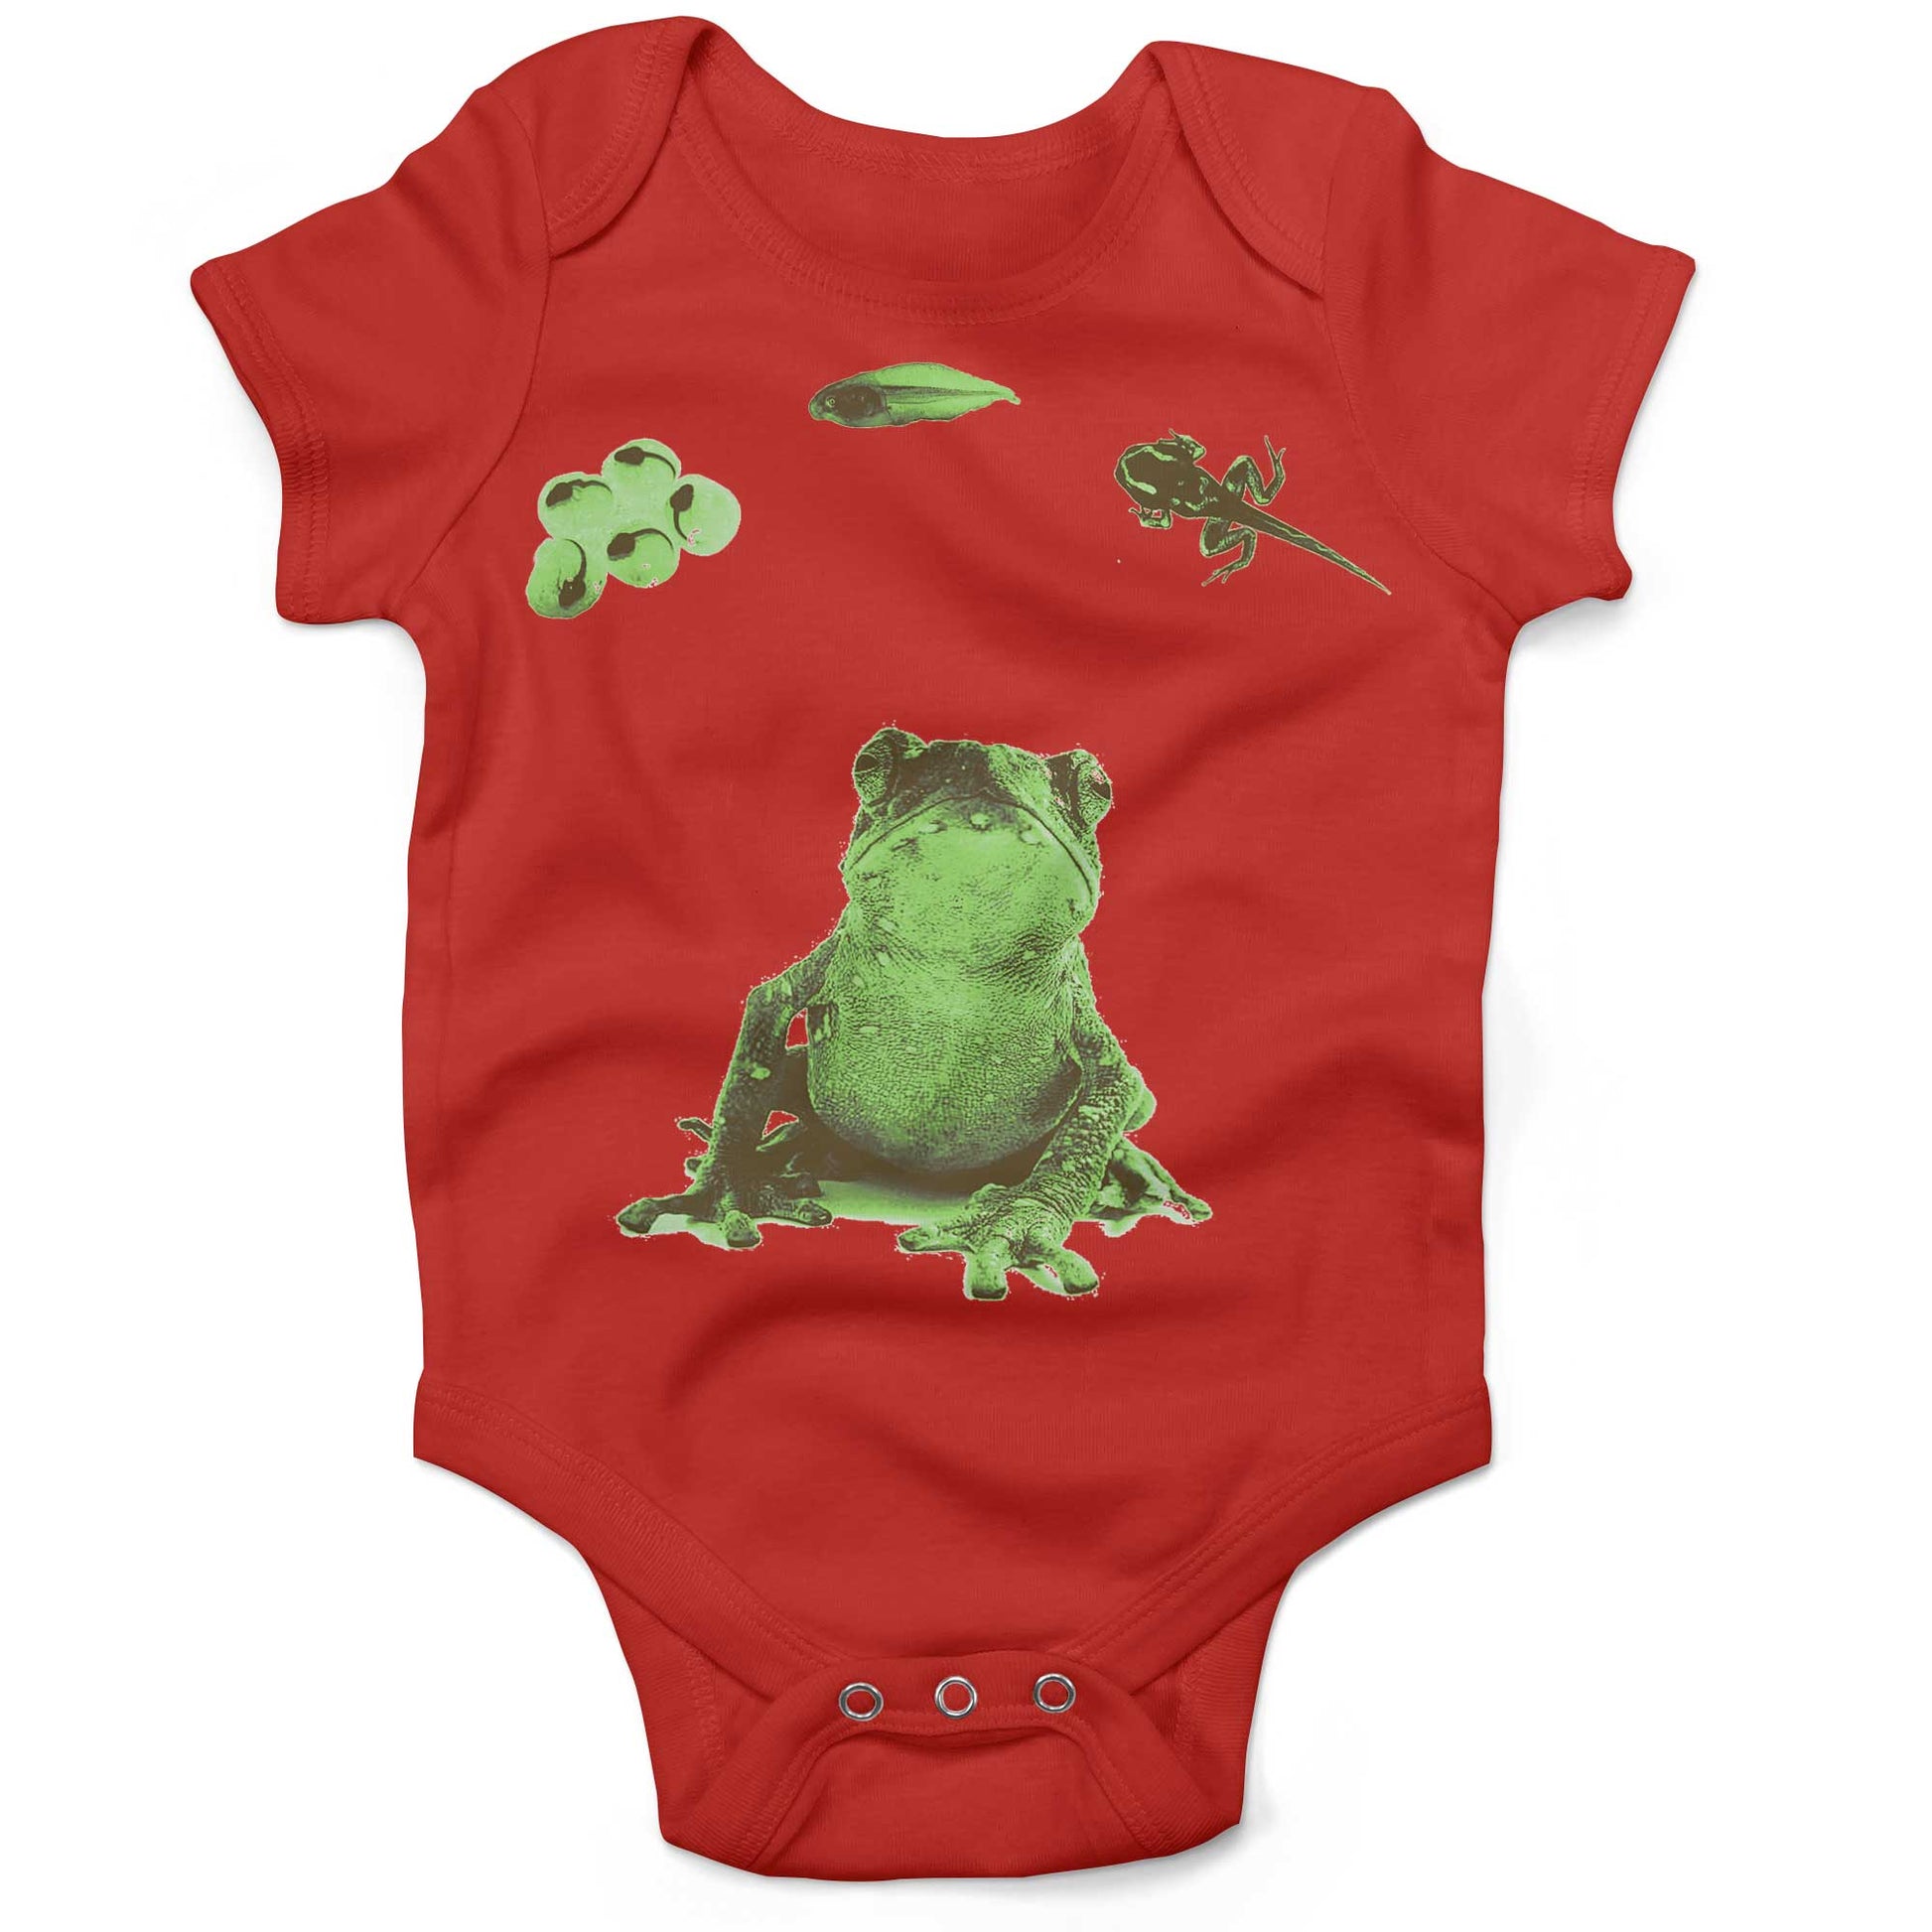 Frog Lifecycle Infant Bodysuit or Raglan Baby Tee-Organic Red-3-6 months